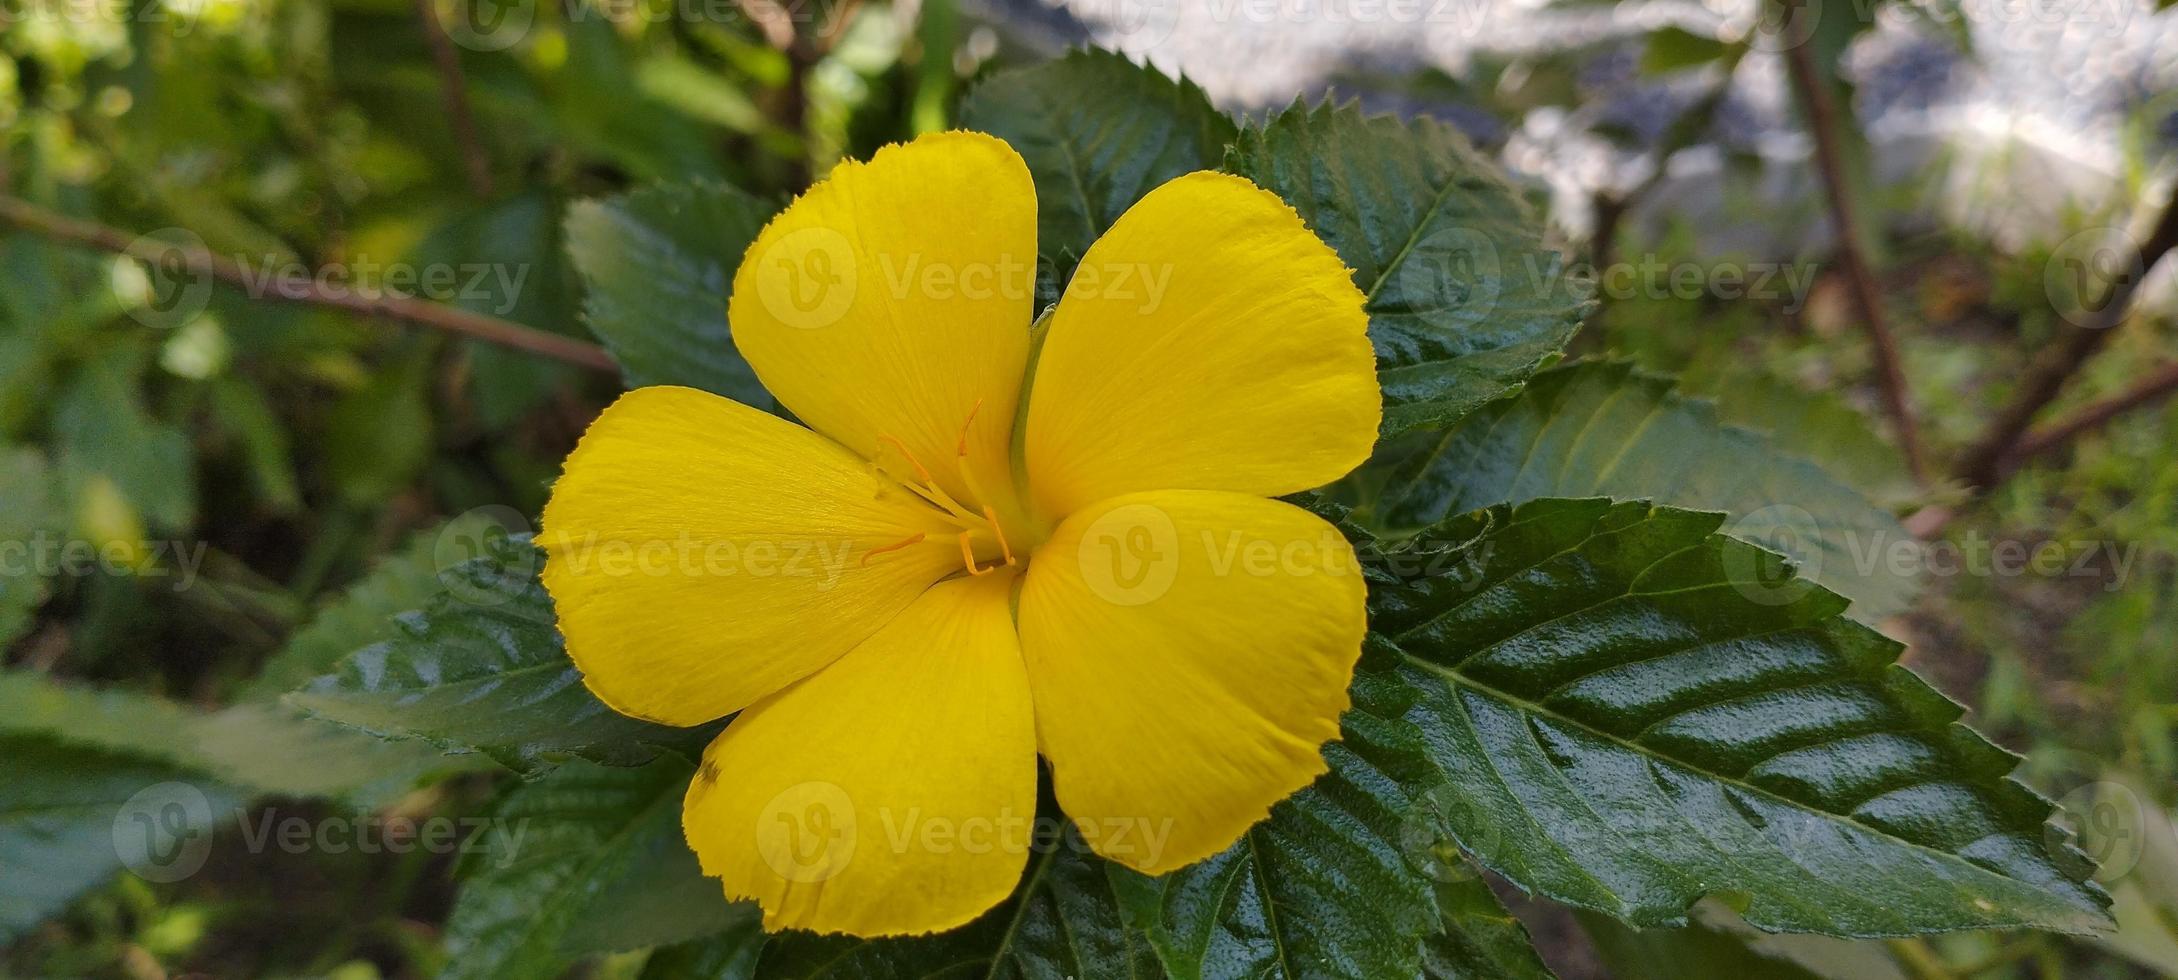 Turnera ulmifolia is a species of flowering plant of the flower genus at eight o'clock photo